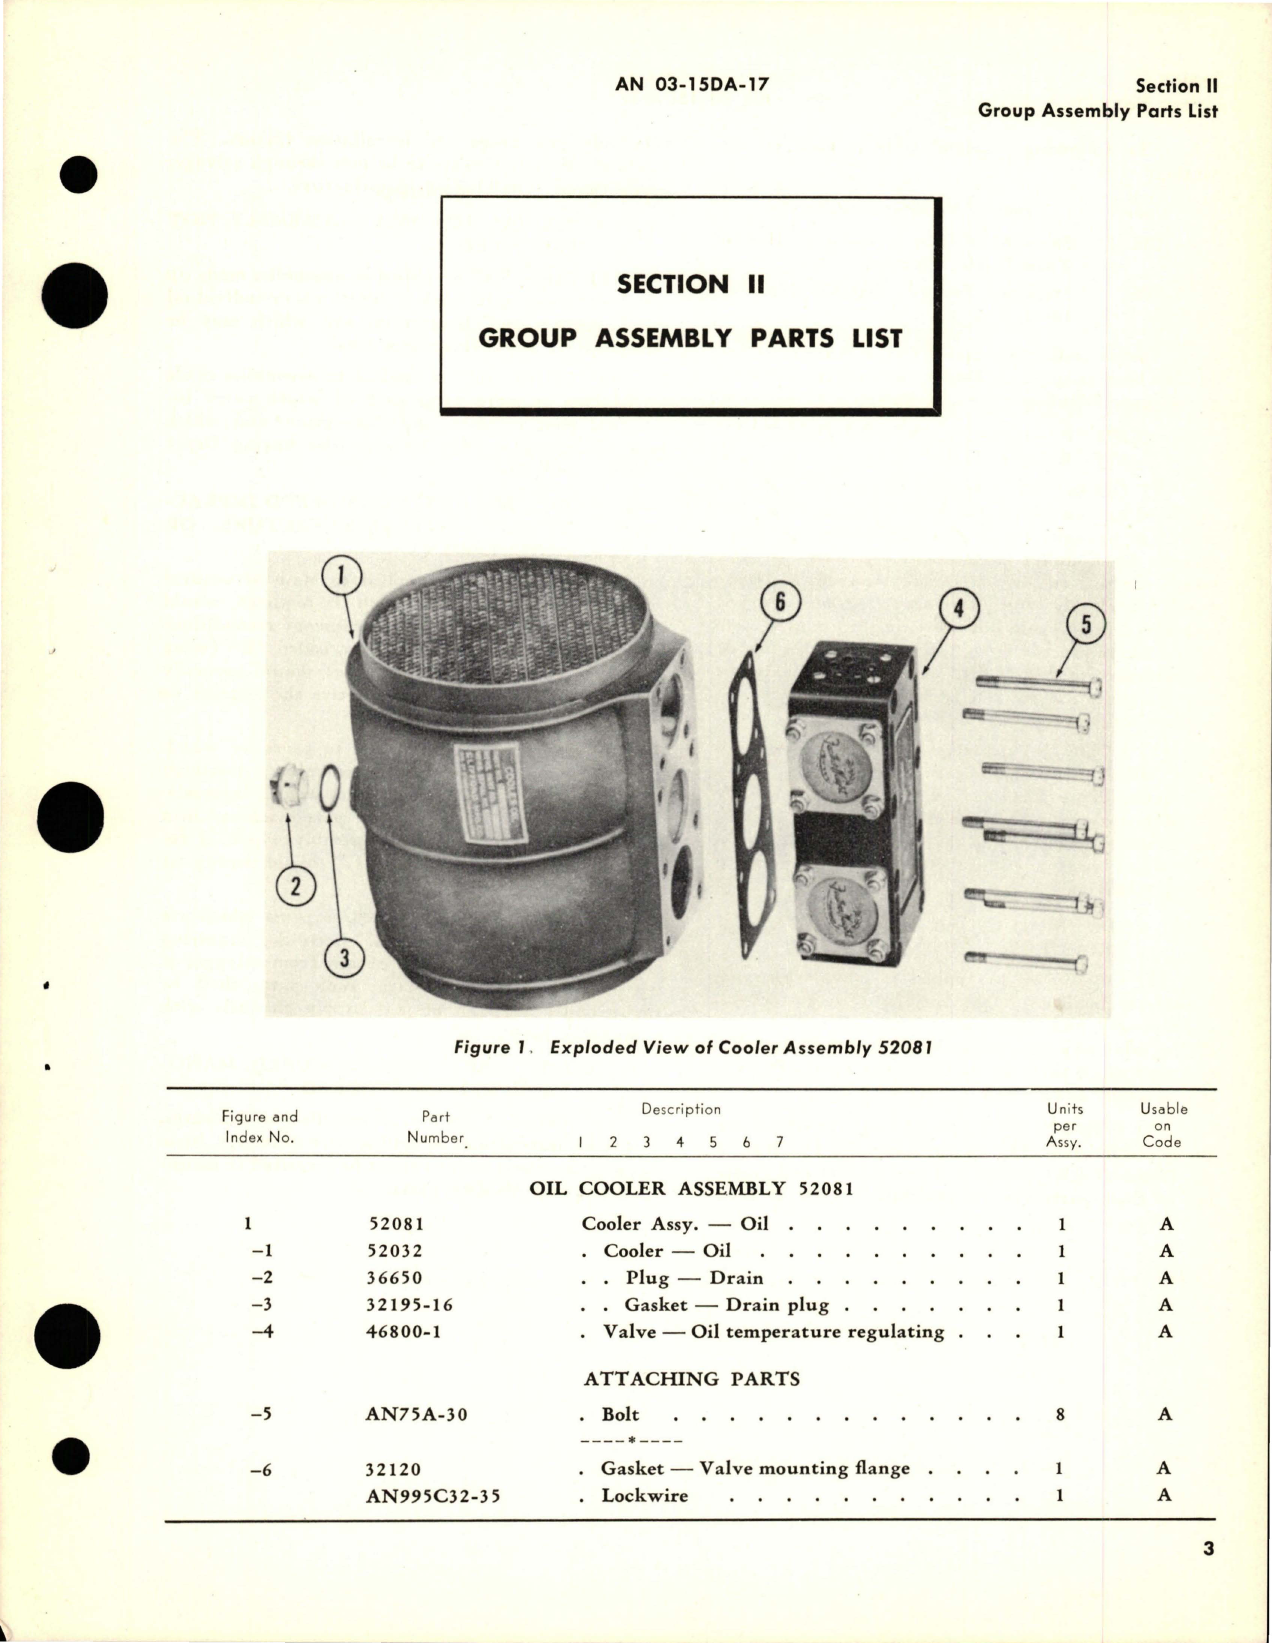 Sample page 5 from AirCorps Library document: Illustrated Parts Breakdown for Oil Cooler Assembly - Part 52081